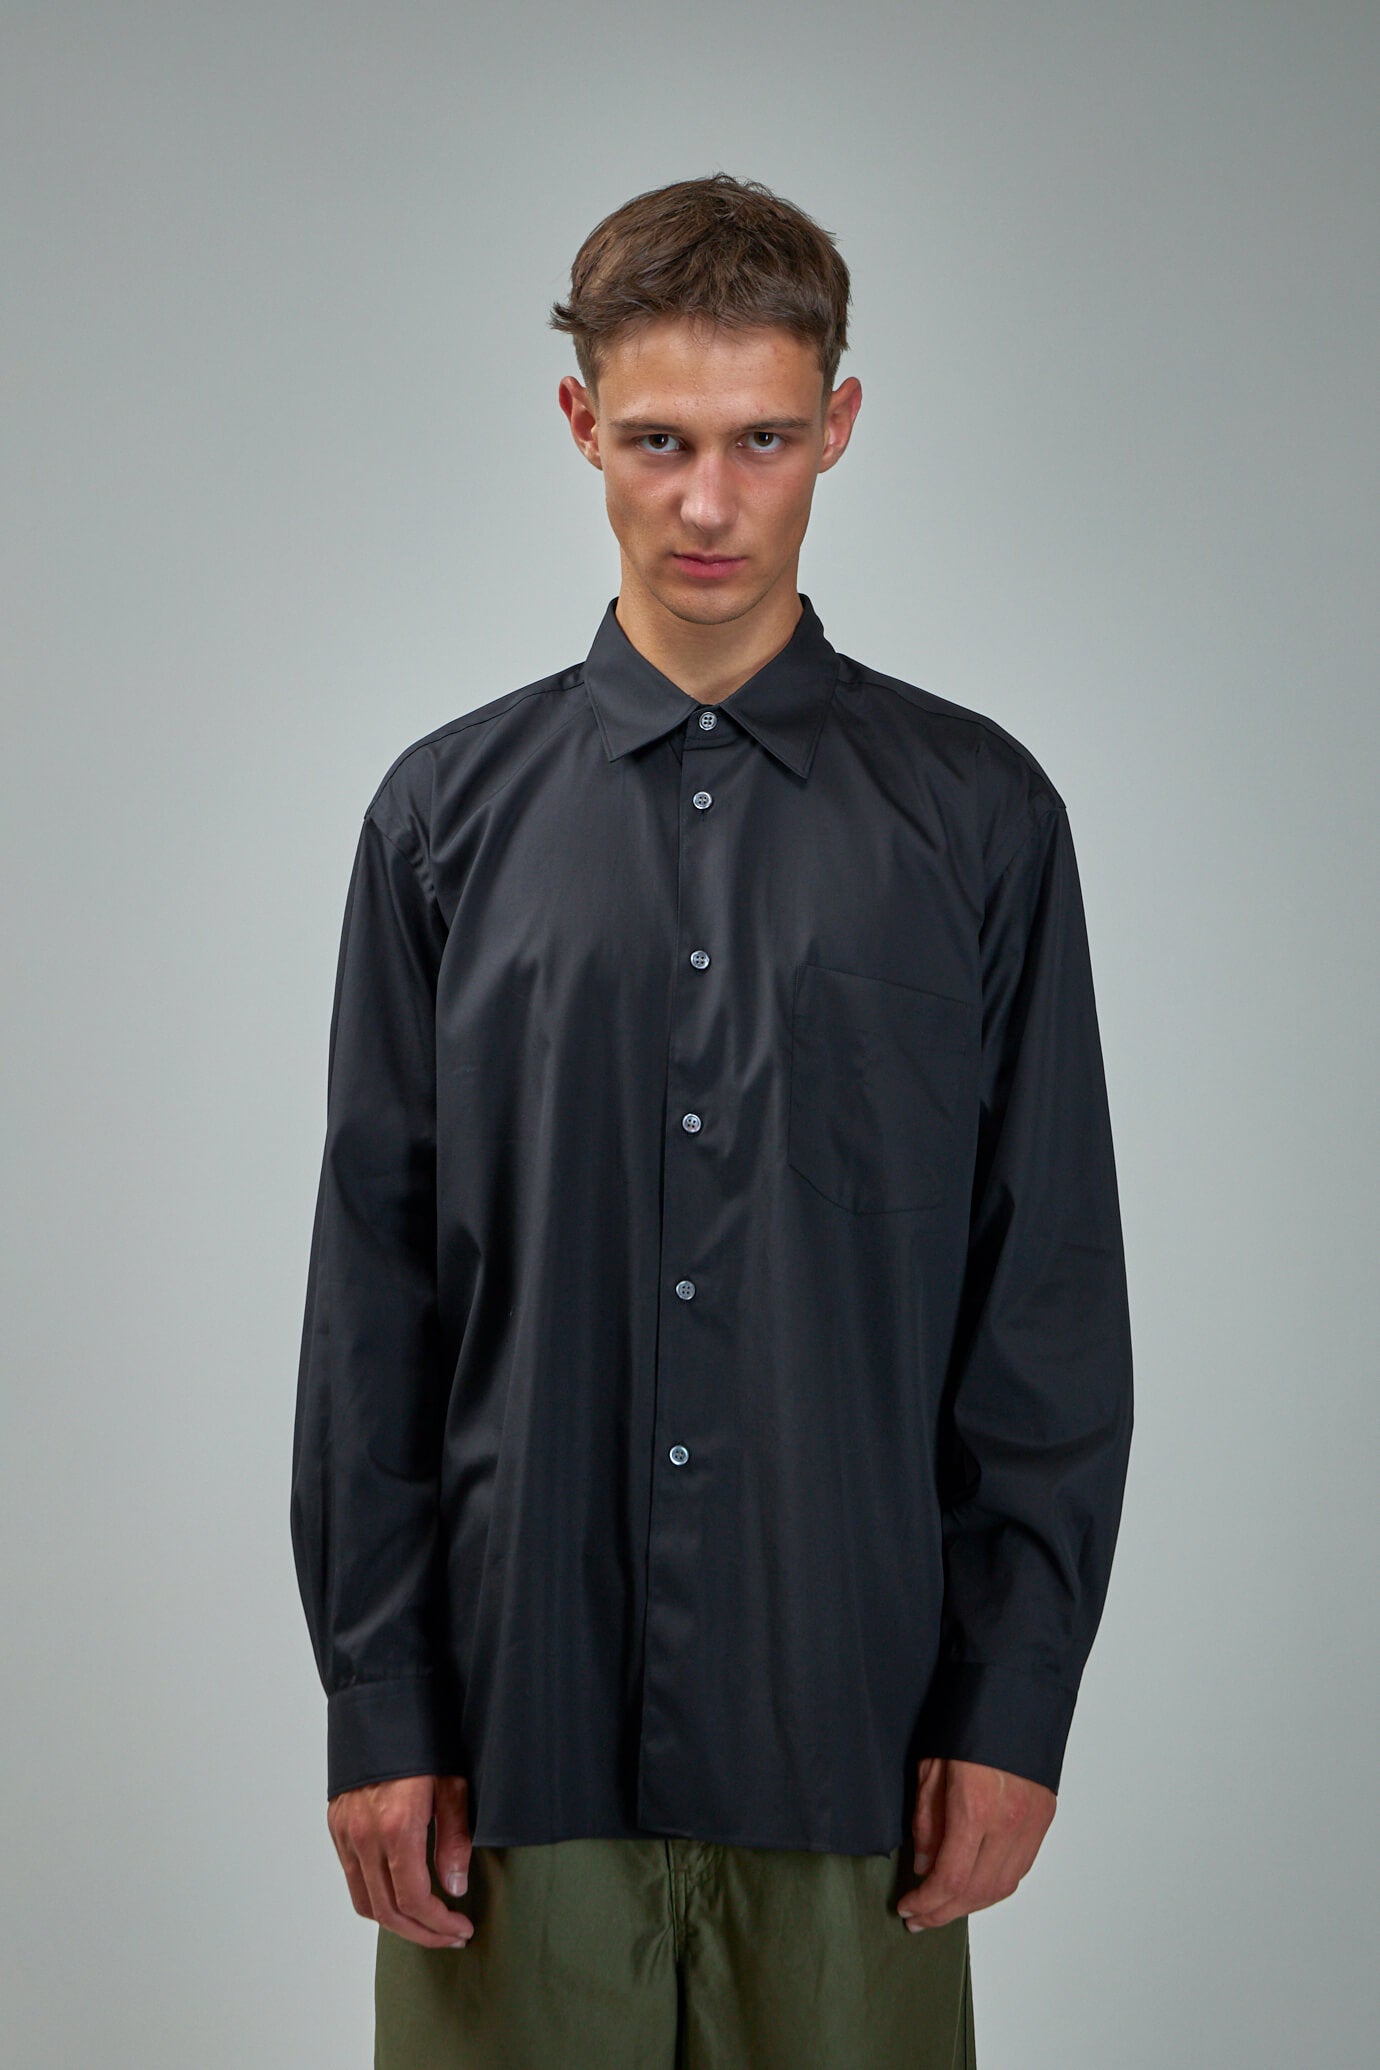 Comme des garcons shirts forever shirt 黒 - シャツ